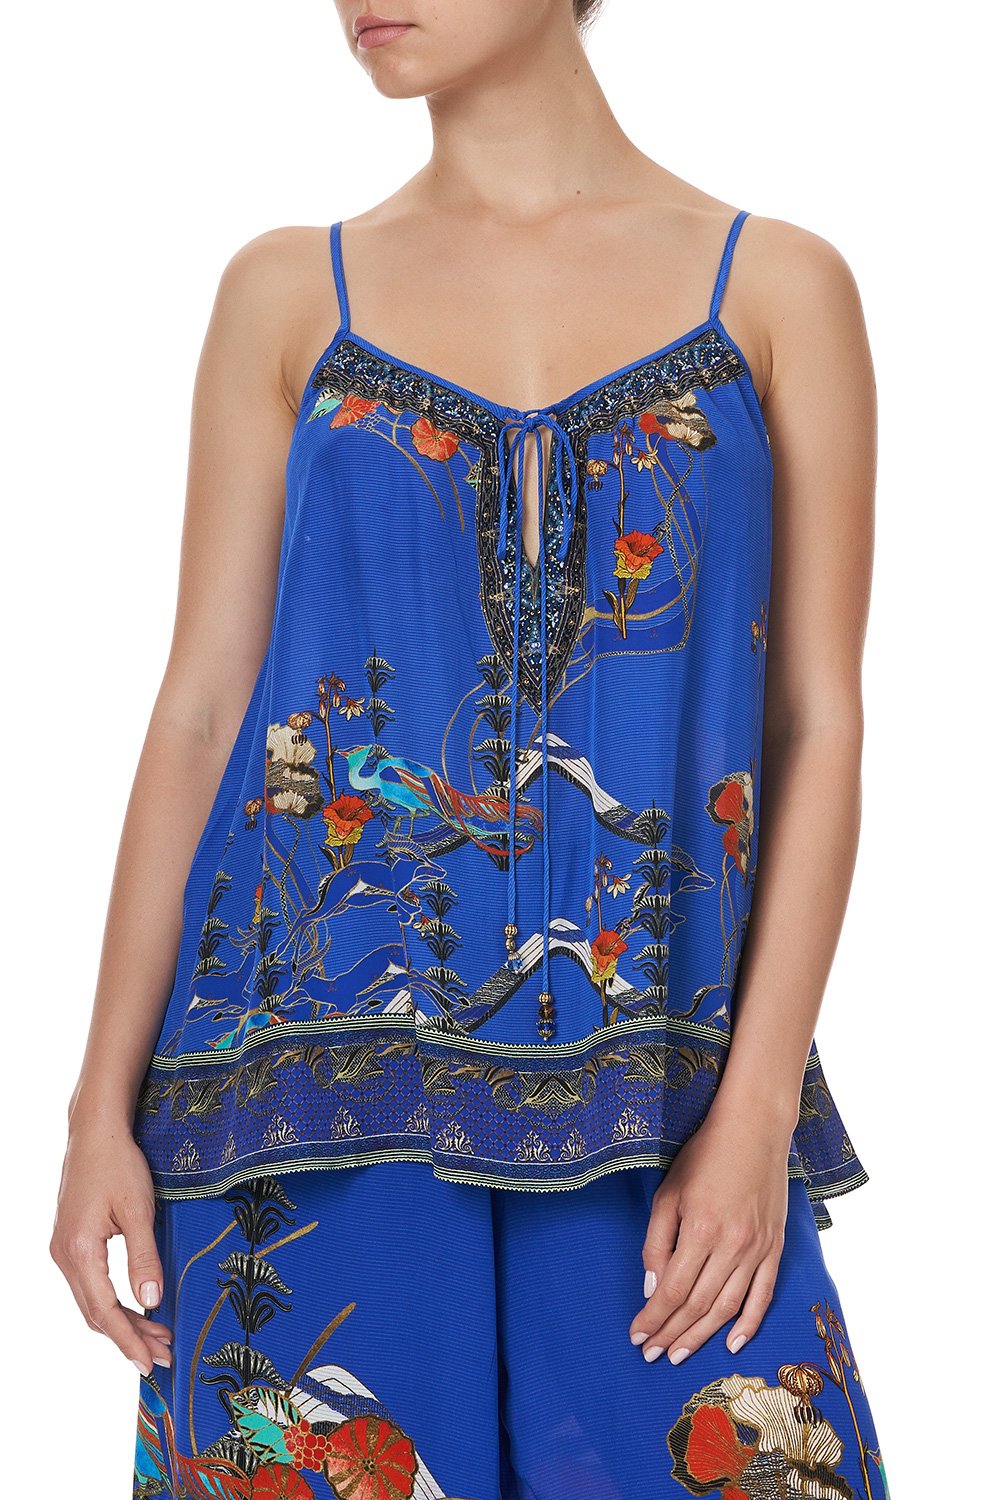 STRAP TOP WITH TIE FRONT DETAIL TREE OF LIFE